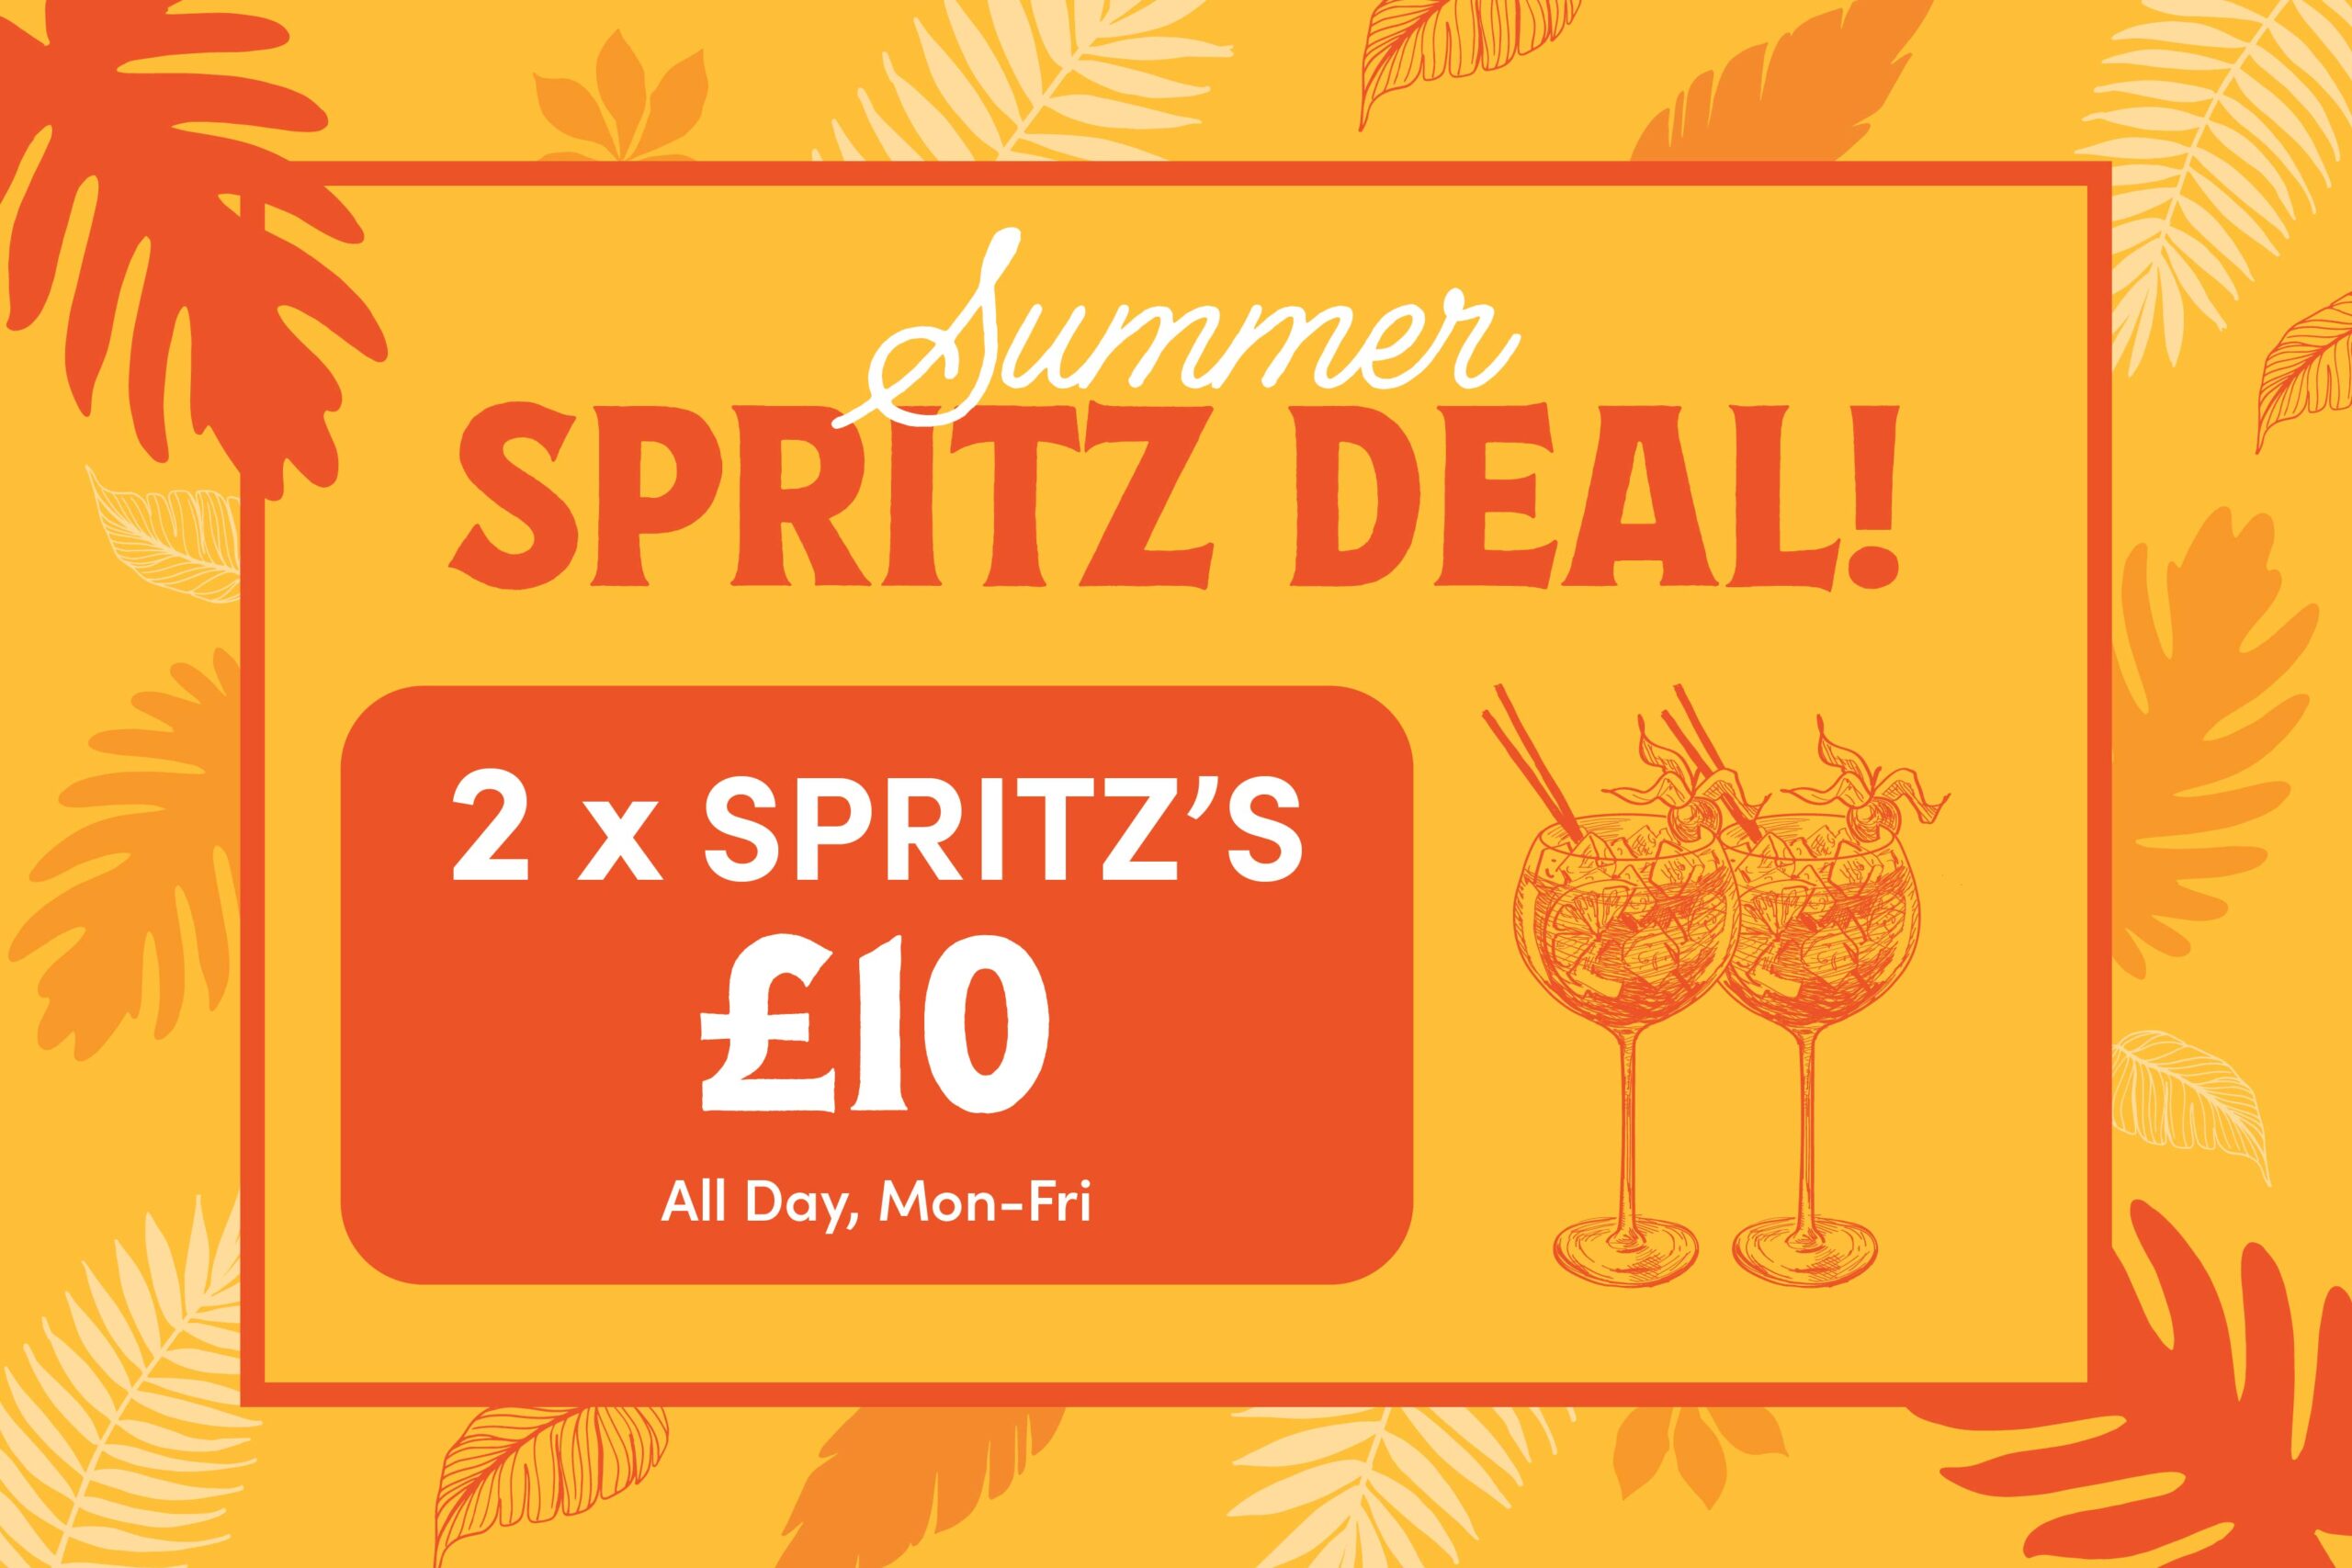 Drinks Deal 2 x Spritz for £10